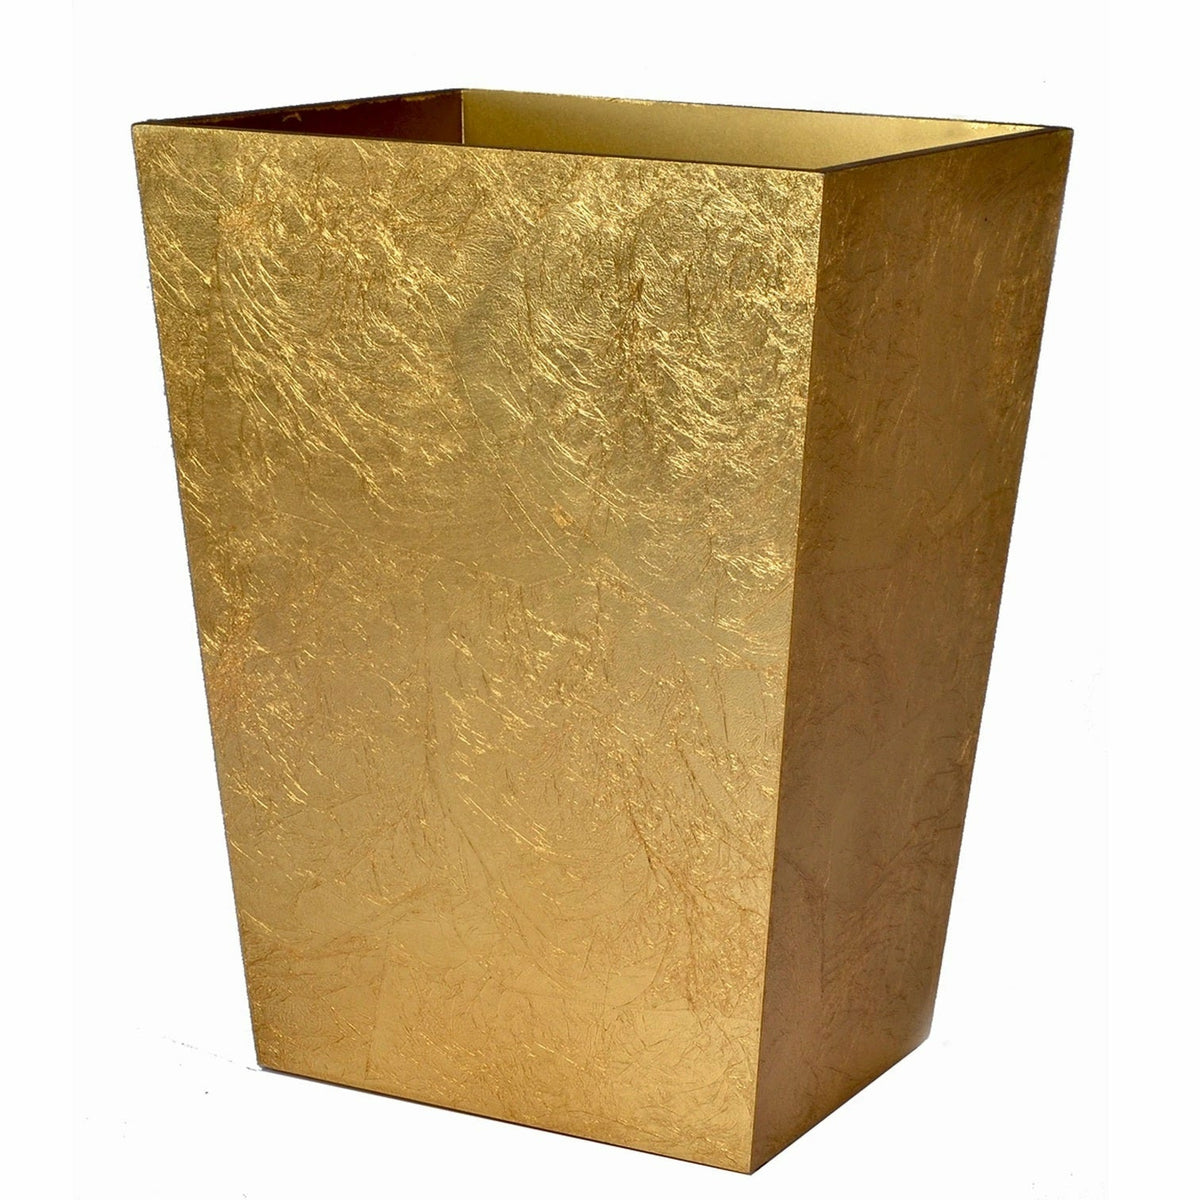 Mike and Ally Eos Bath Accessories Wastebasket Gold Leaf